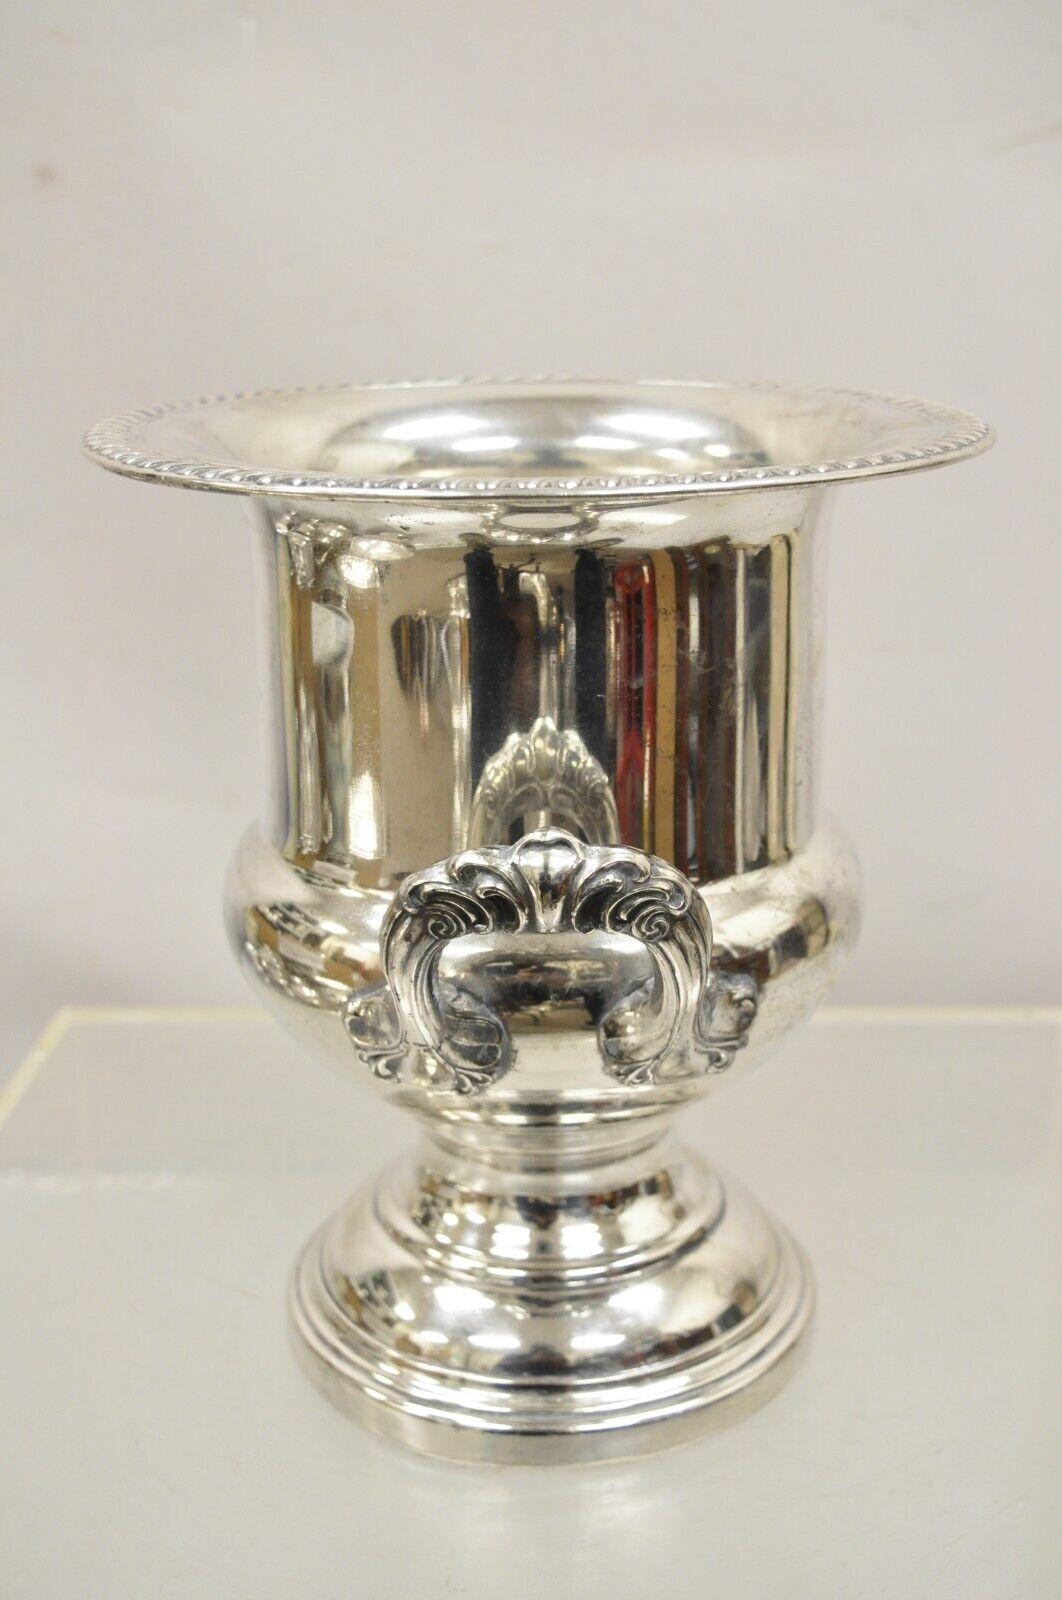 Vintage Silver Plated Twin Handles Champagne Chiller Ice Bucket. Circa Mid to Late 20th Century. Measurements: 10